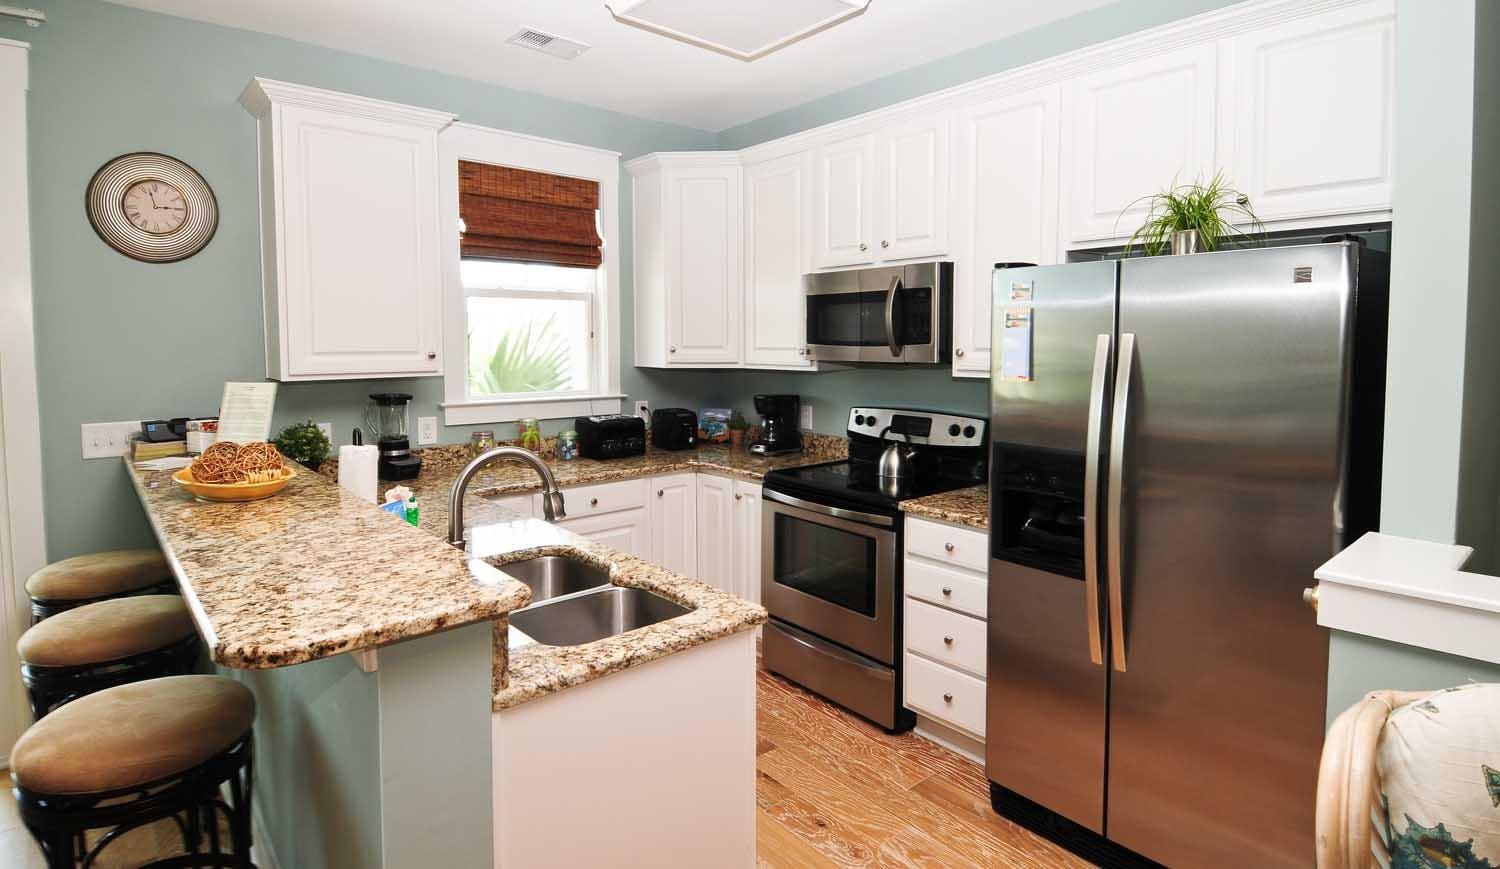 North Beach Cottages - 2 Bedroom Exchange Luxury Townhome